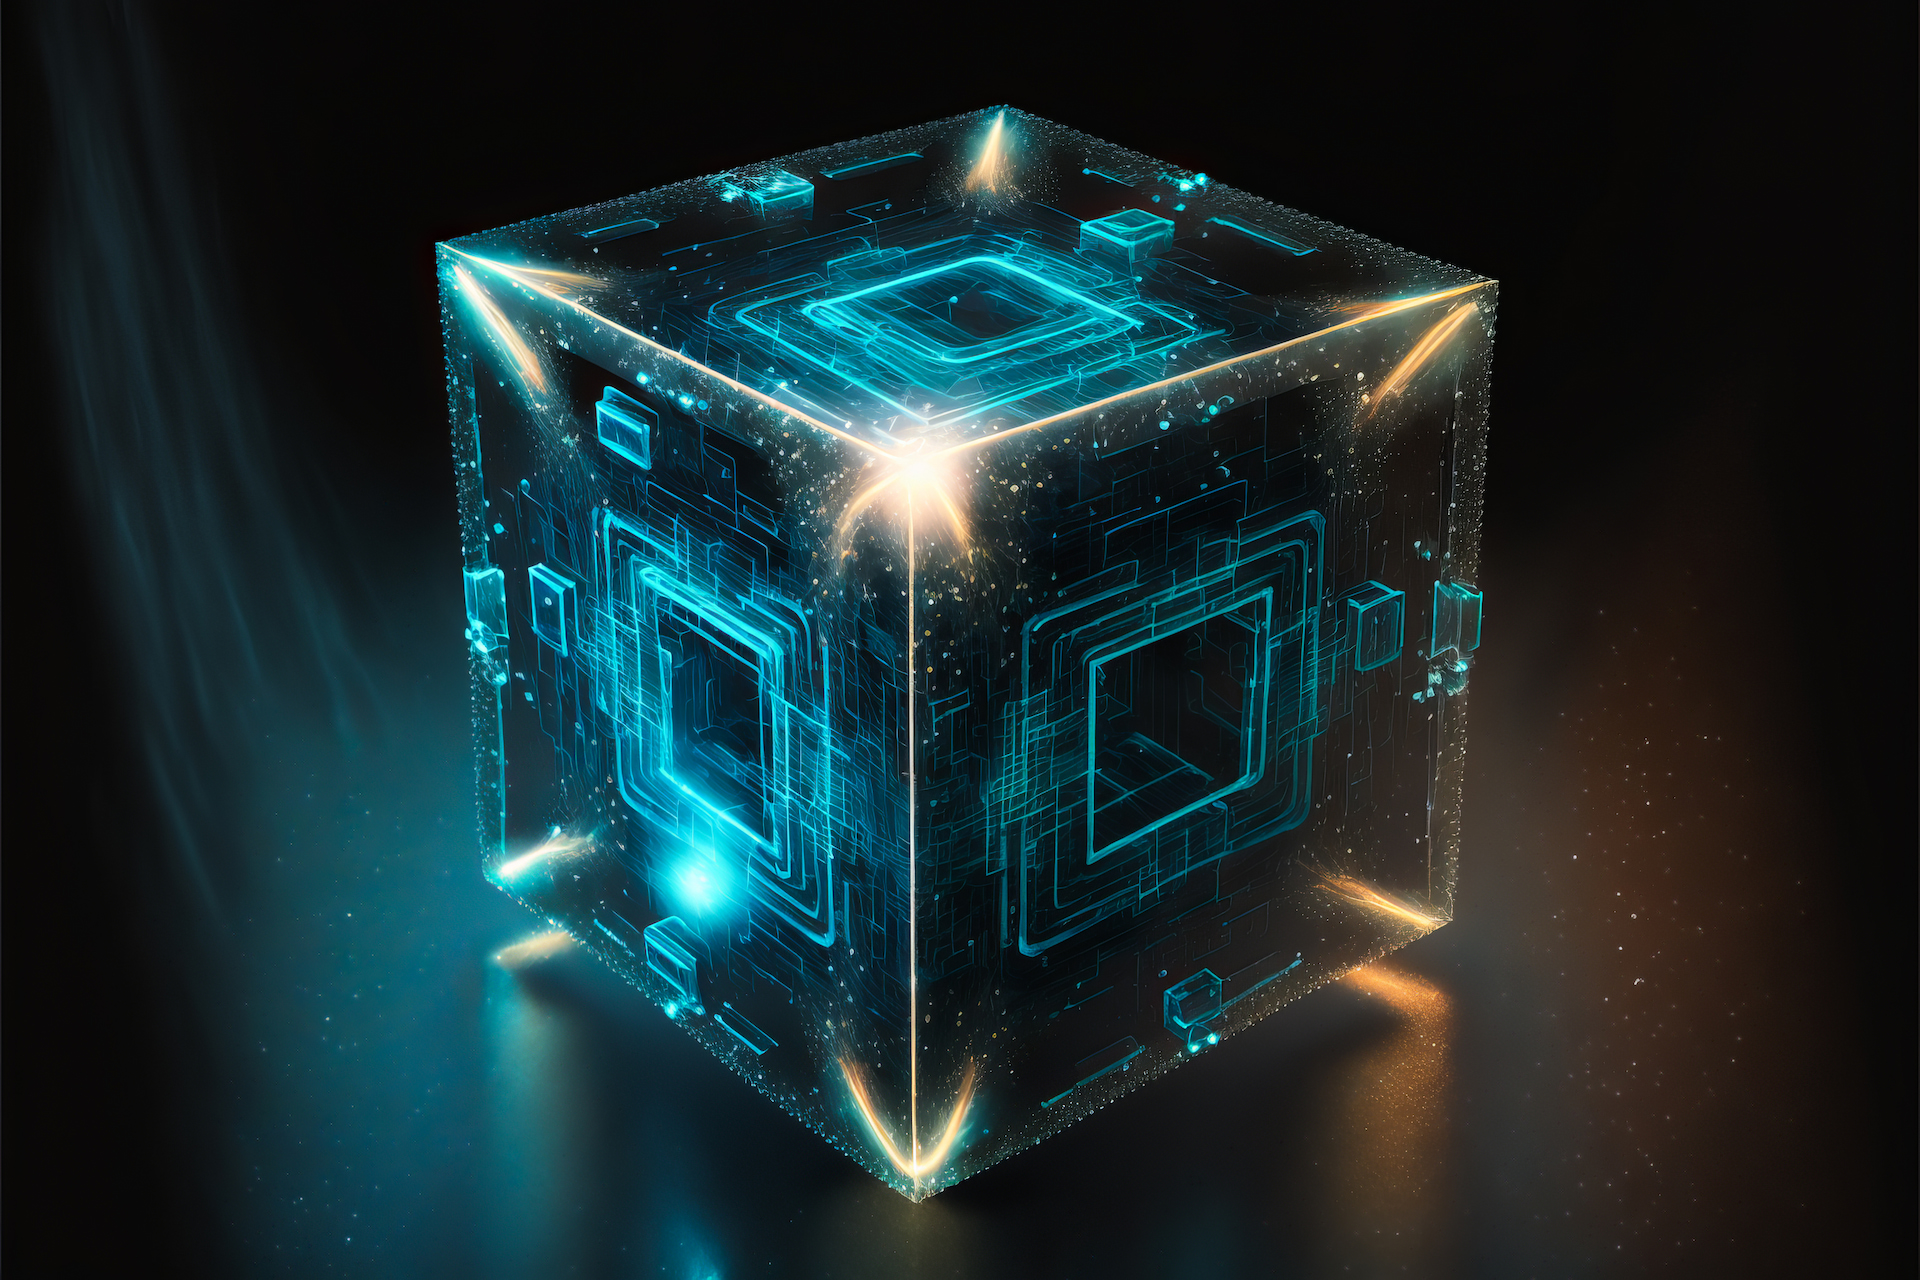 The Neutrino Power Cube: What Makes It a Game-Changer in Sustainable Energy?